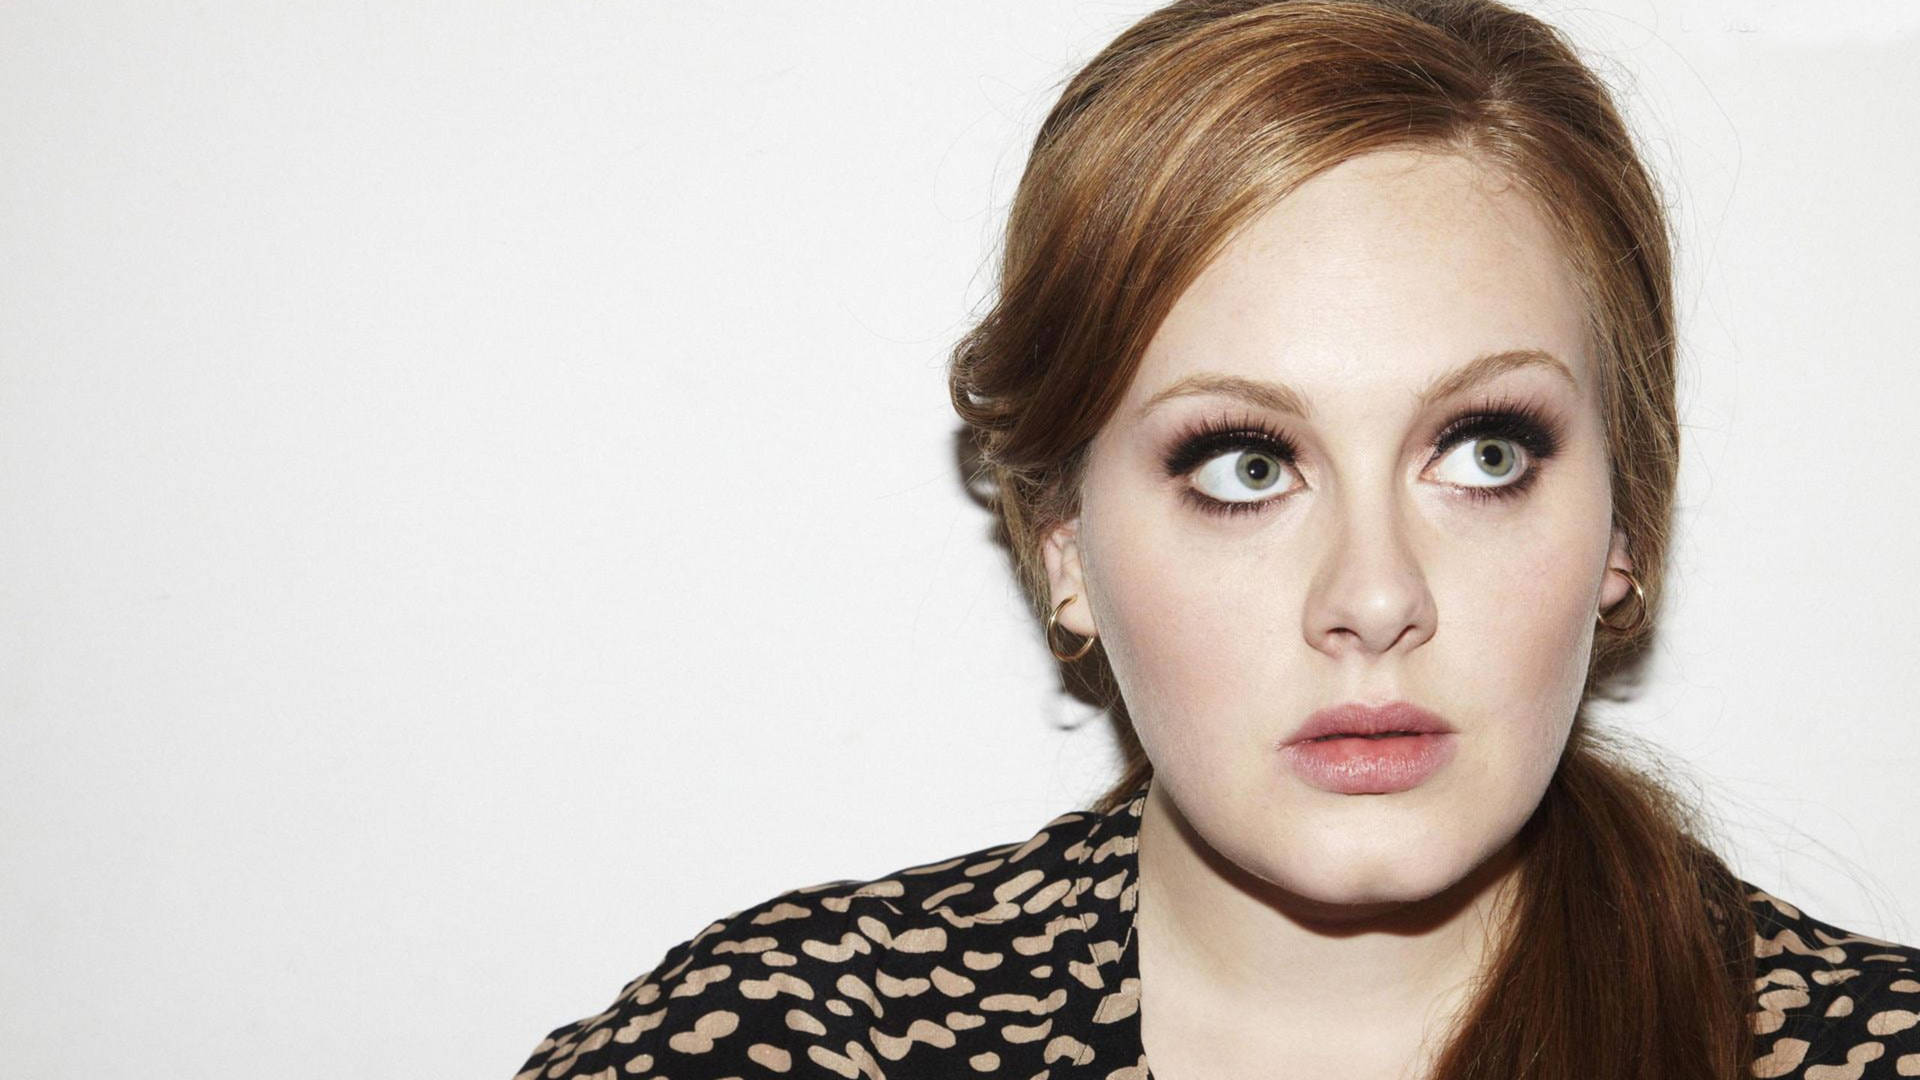 Free Adele Wallpaper Downloads, [100+] Adele Wallpapers for FREE |  